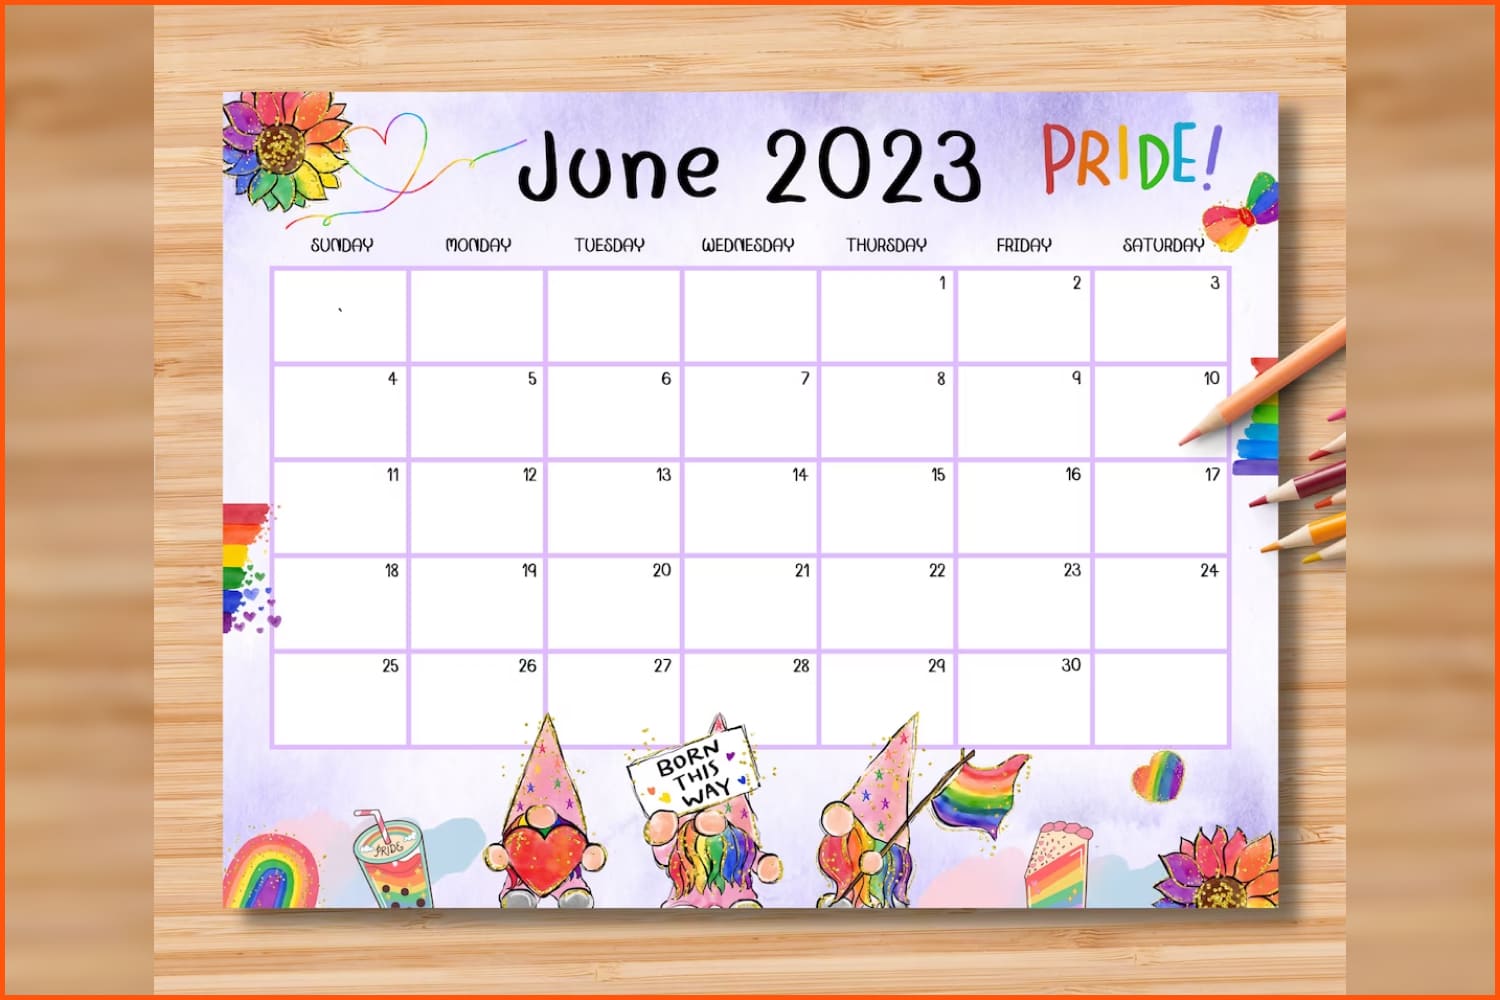 Calendar for June with a pattern of gnomes and rainbow colors.